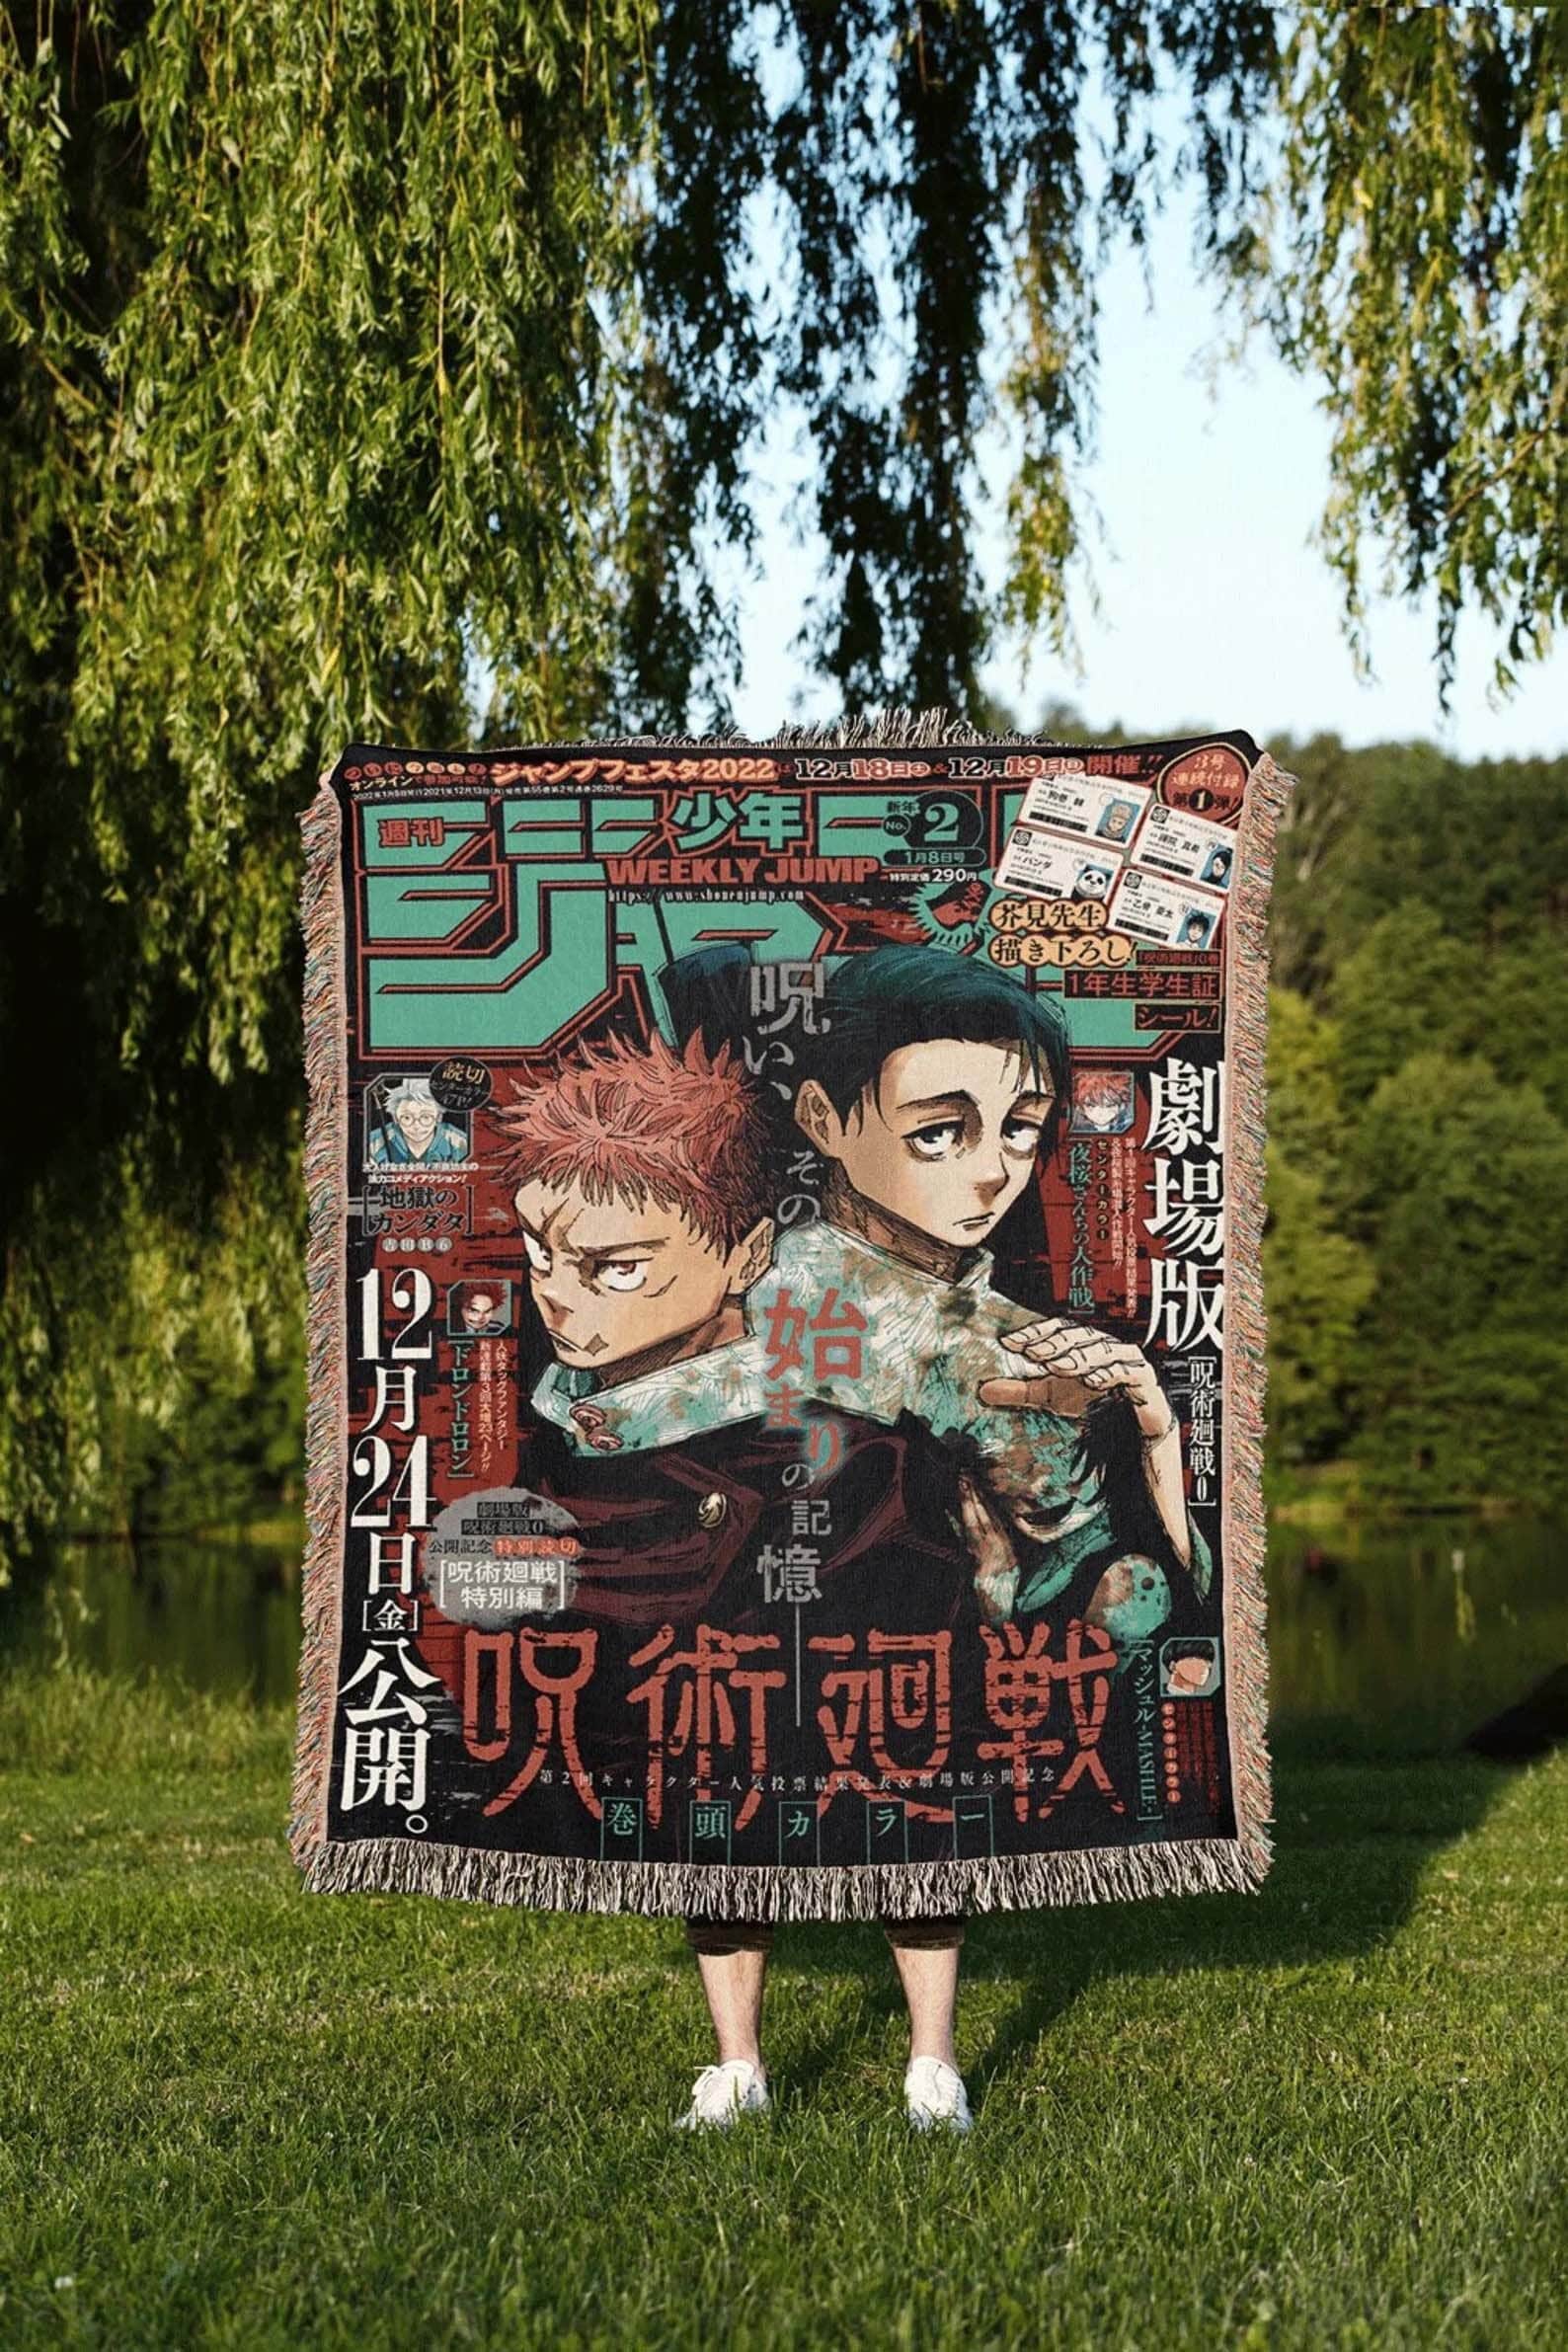 Anime Art Tapestries for Sale